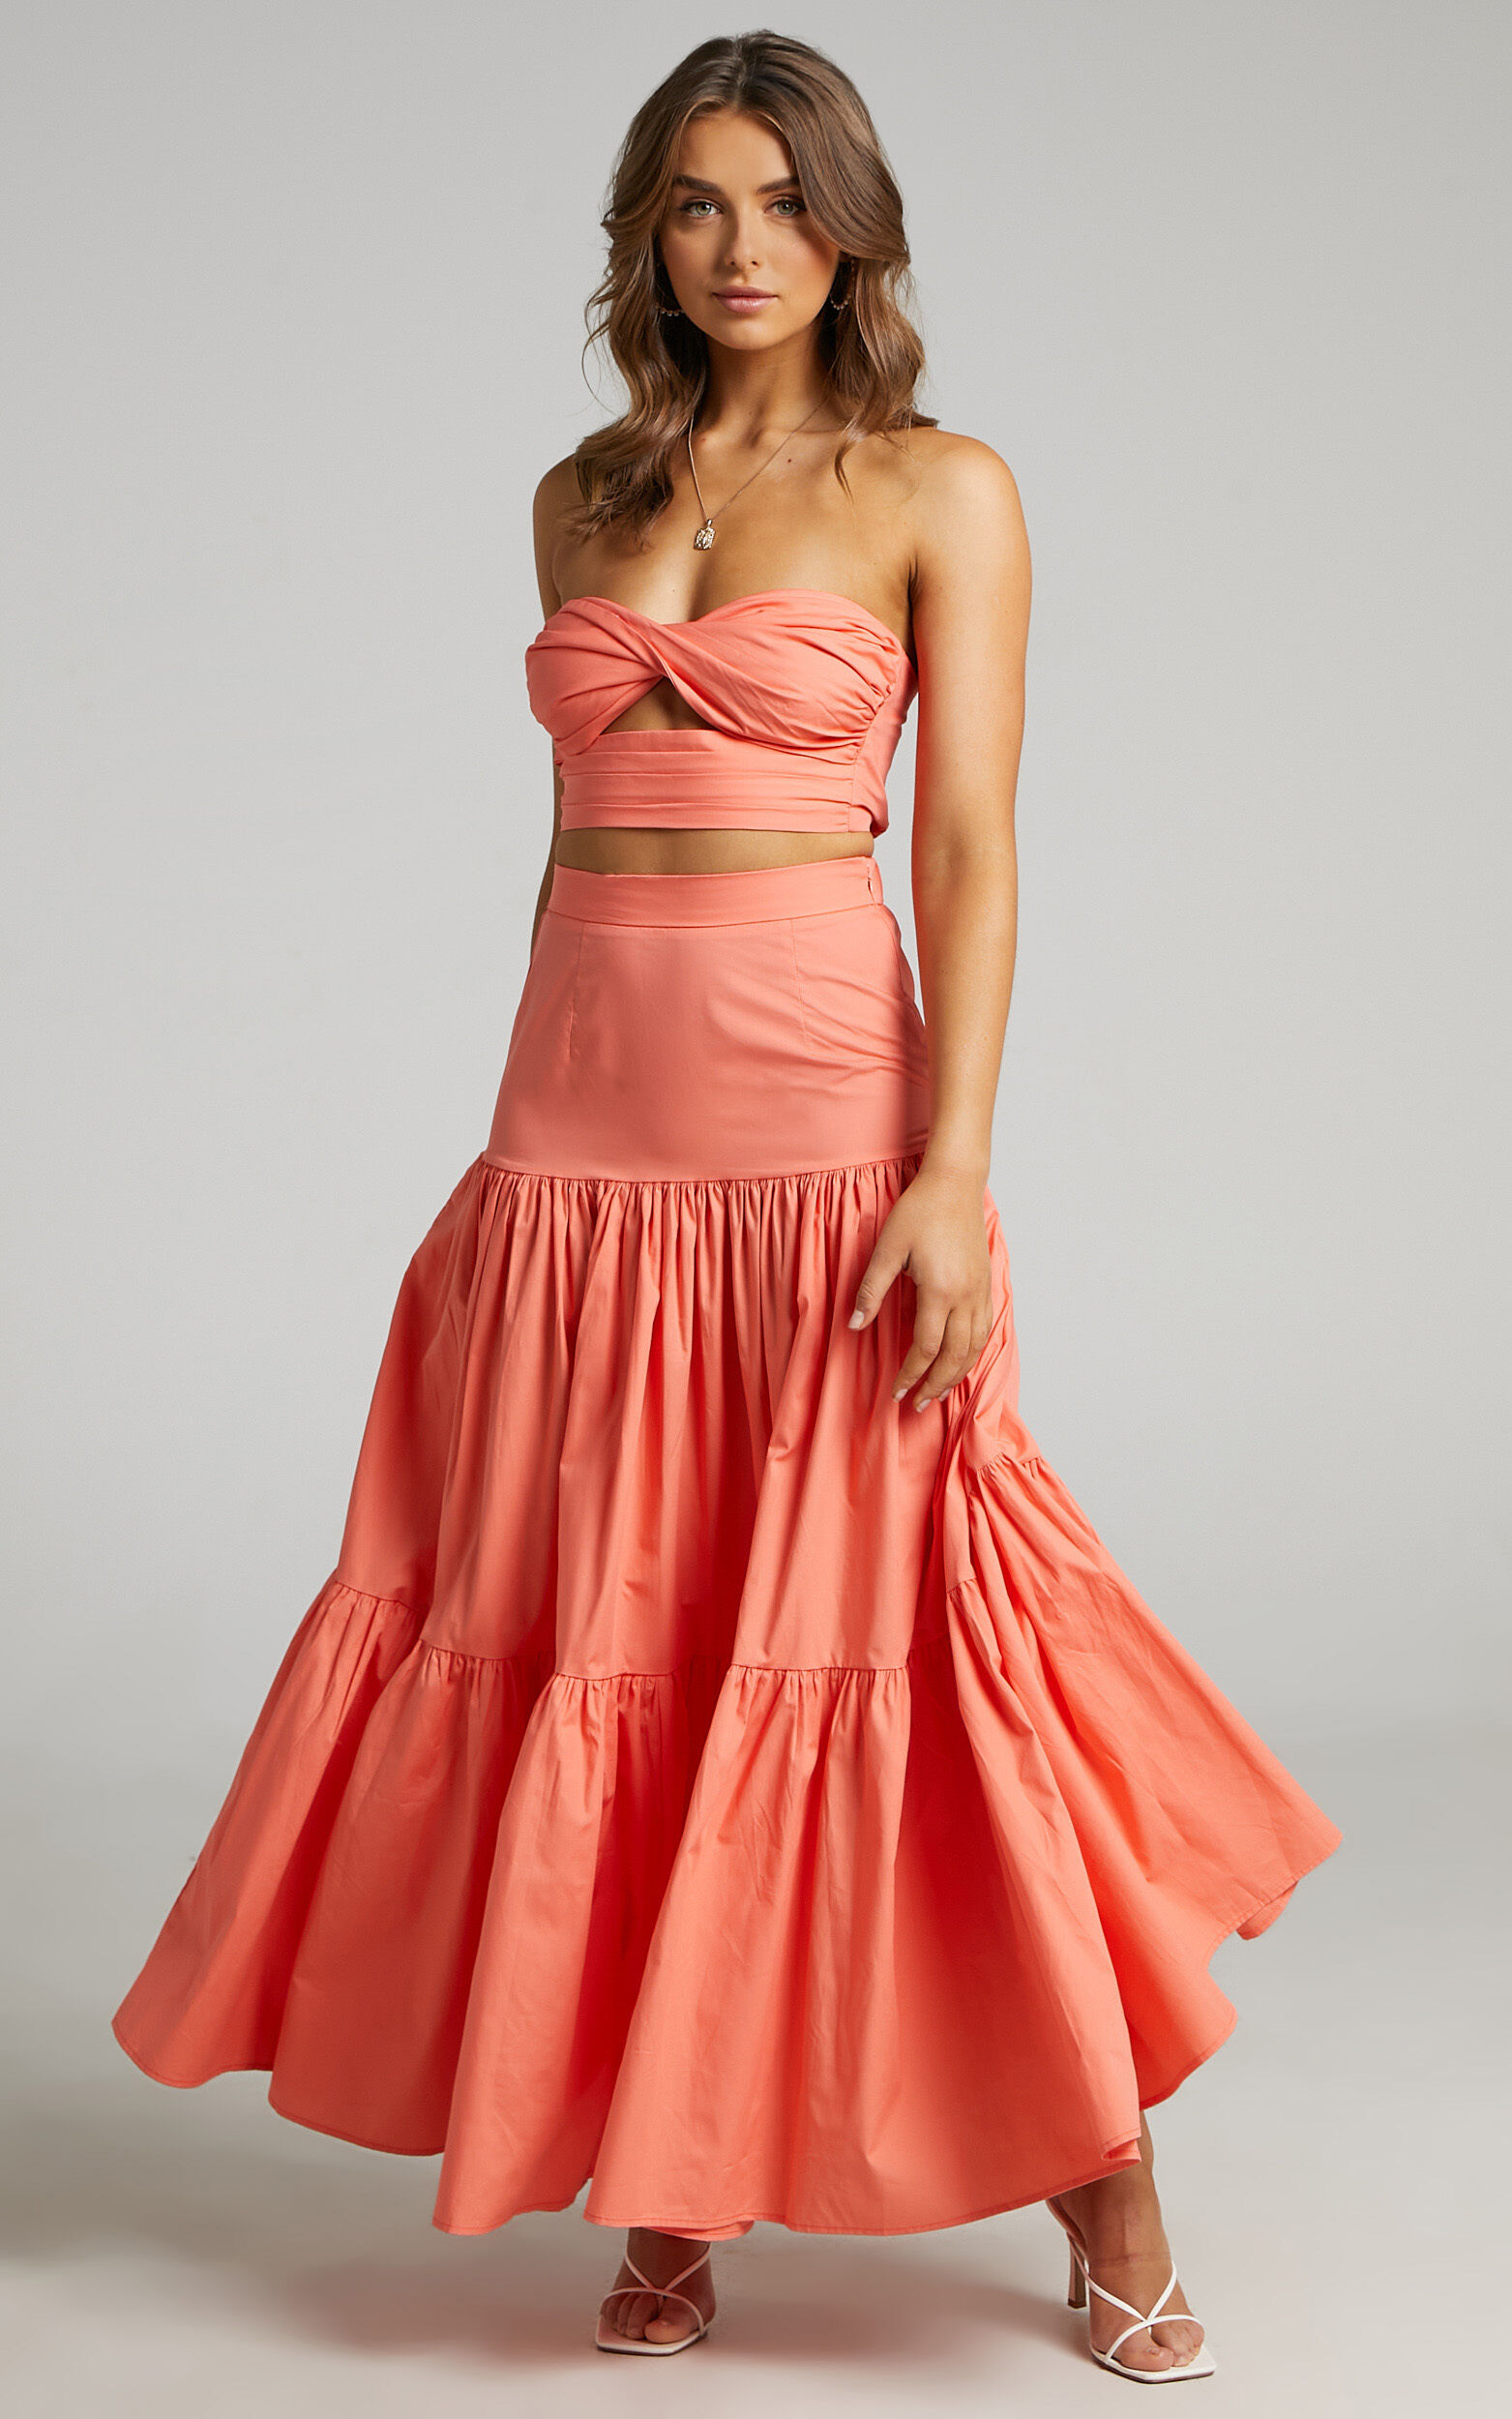 Runaway The Label - Ayla Maxi Skirt in sunset - L, ORG4, super-hi-res image number null